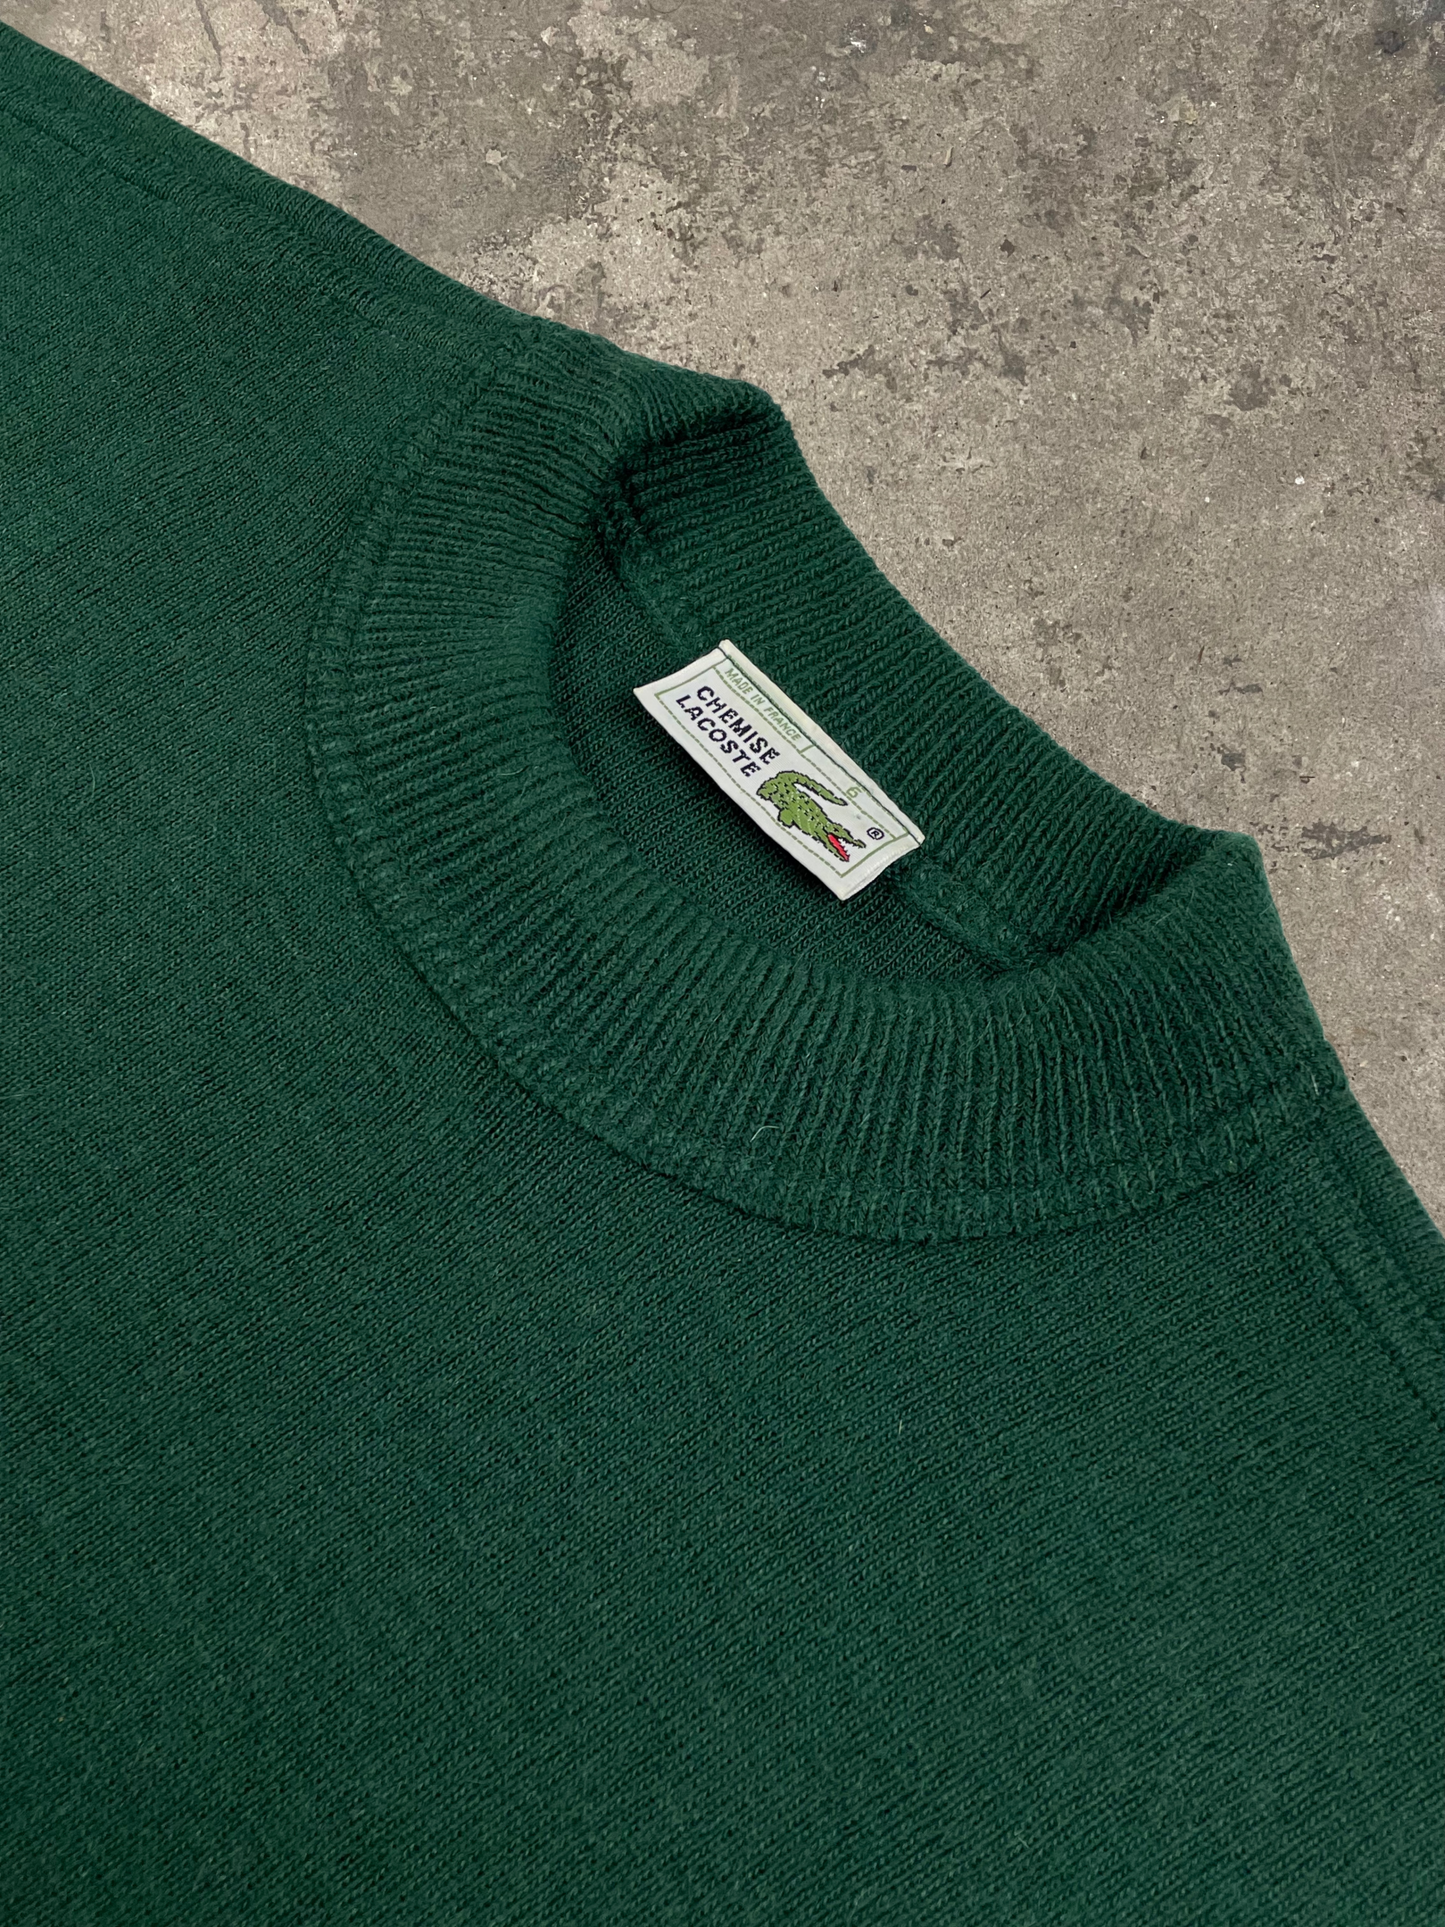 Vintage rare Lacoste Wool embroidered Sweater